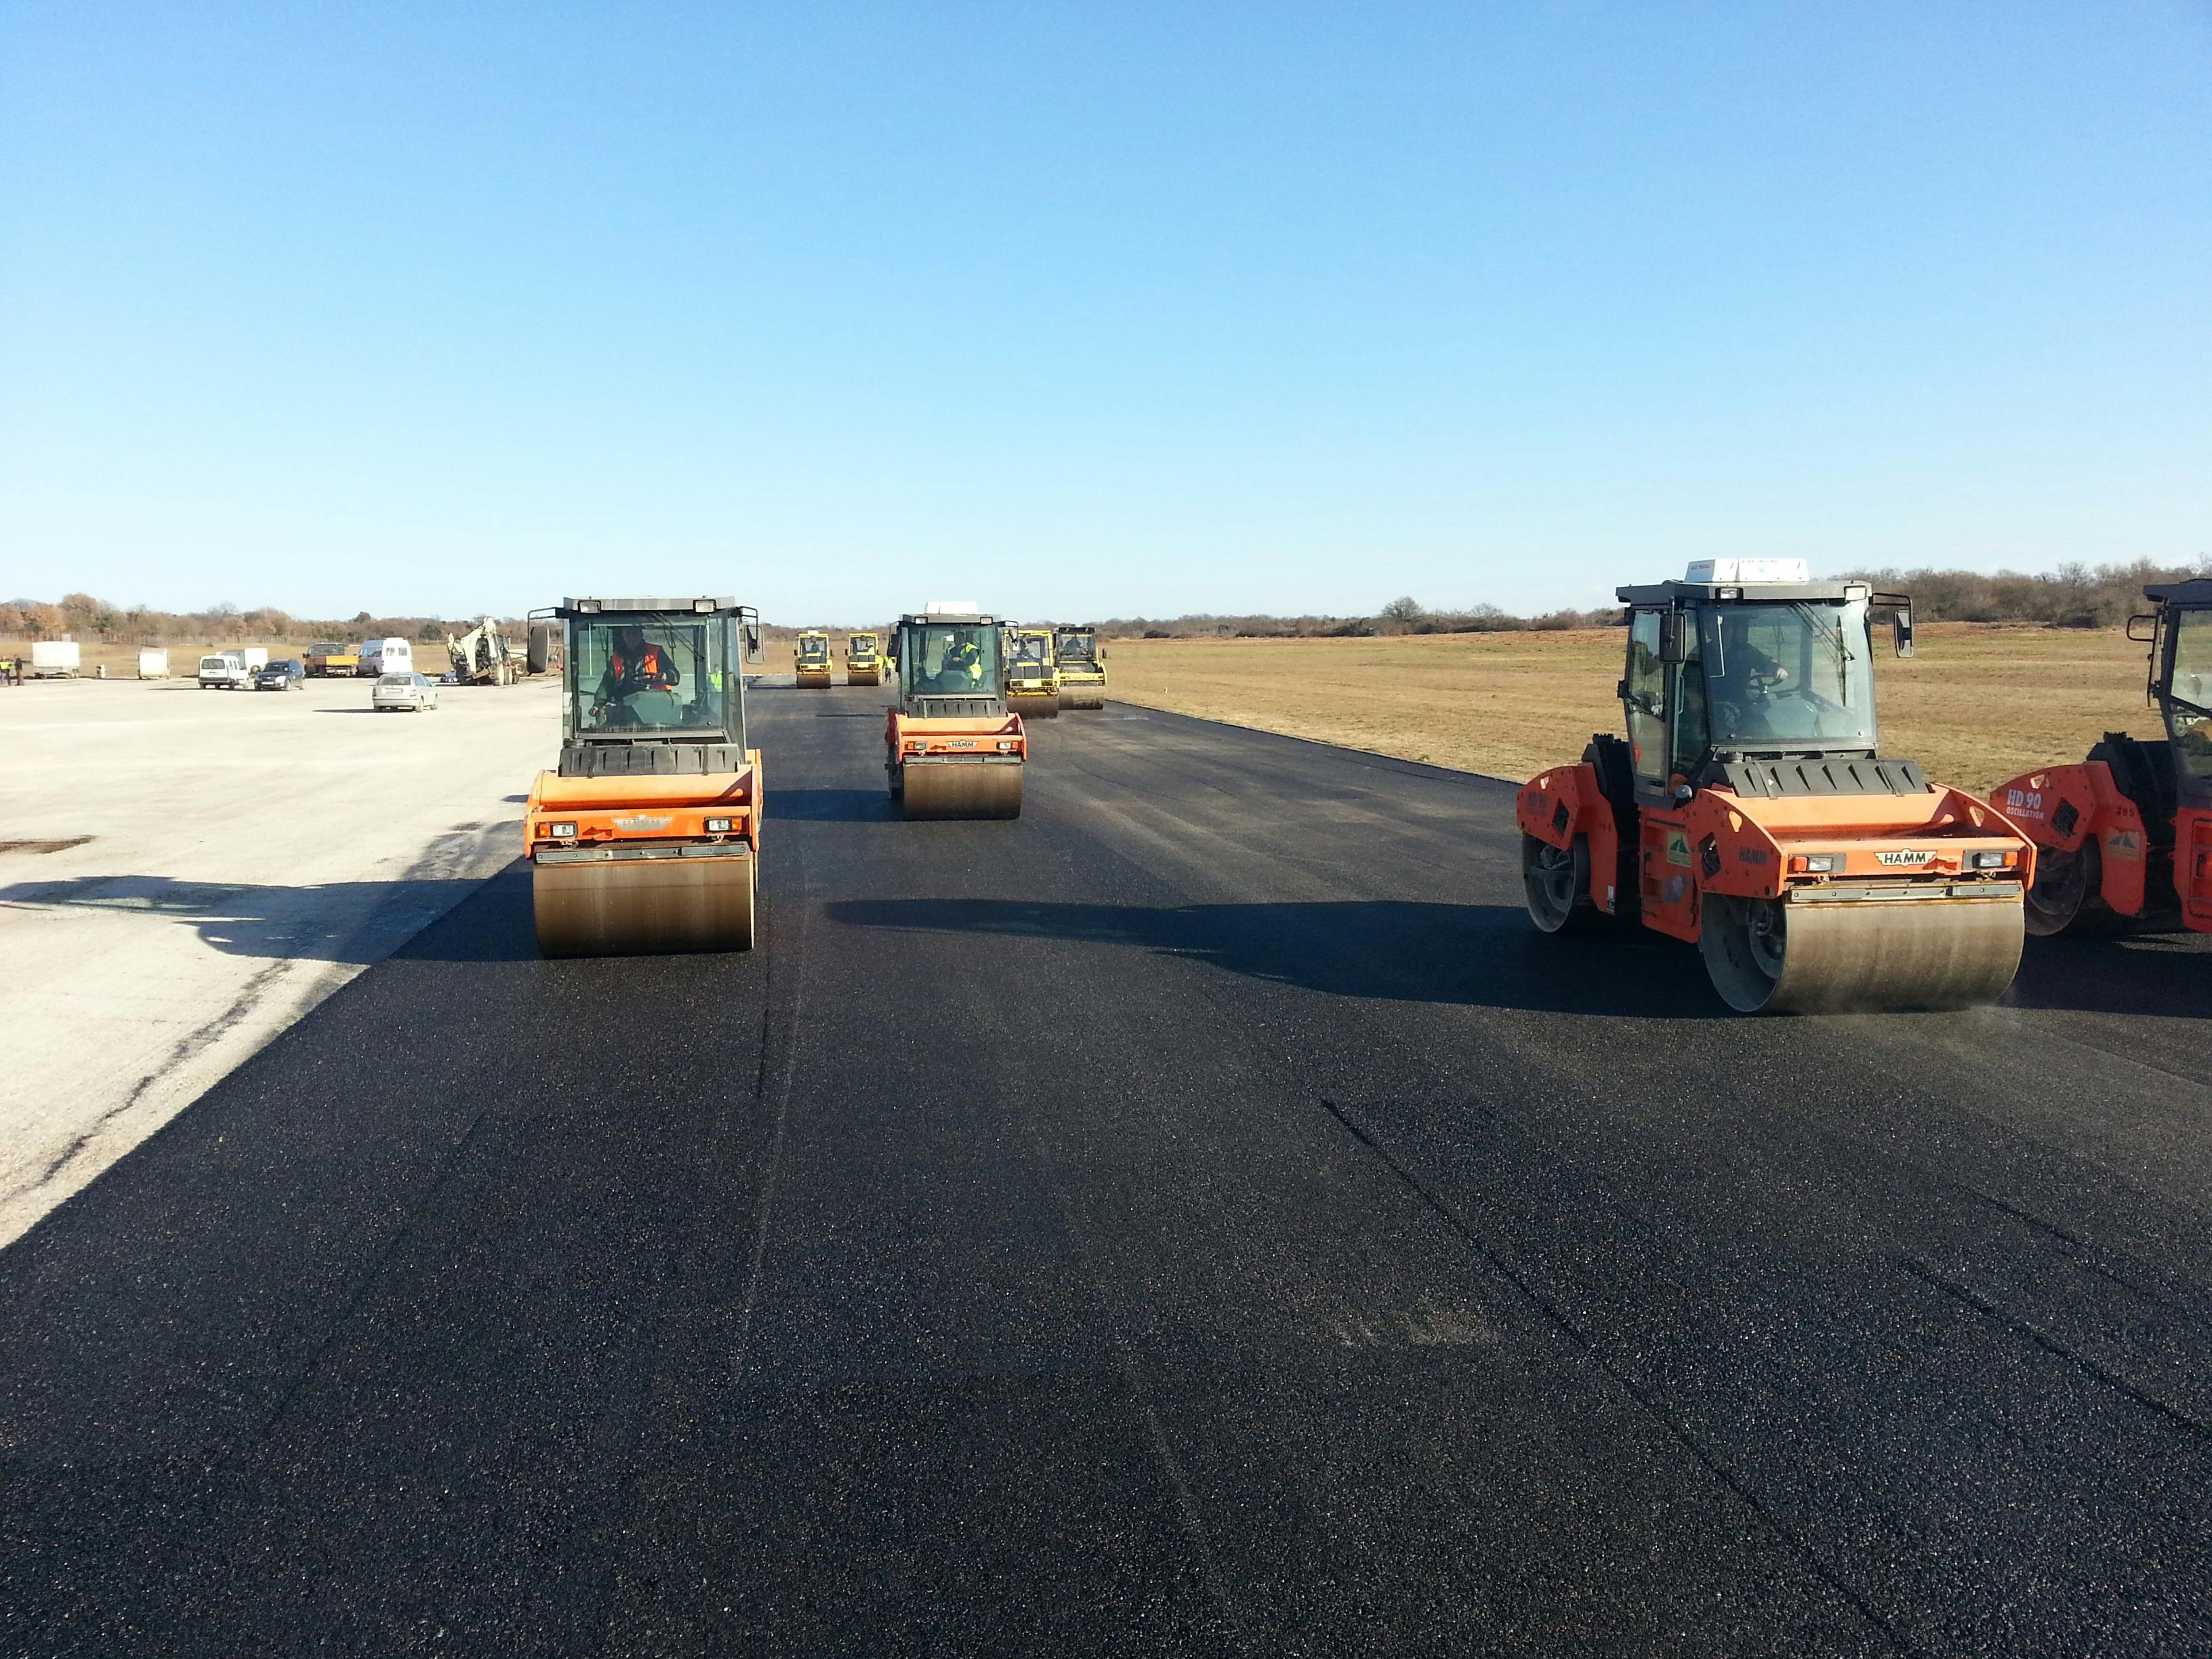 Airport runways must meet strict quality and safety standards. Cracks and uneven surfaces can create hazardous conditions for take-off and landing. The surface of Pula airport had deteriorated after many years of use. 